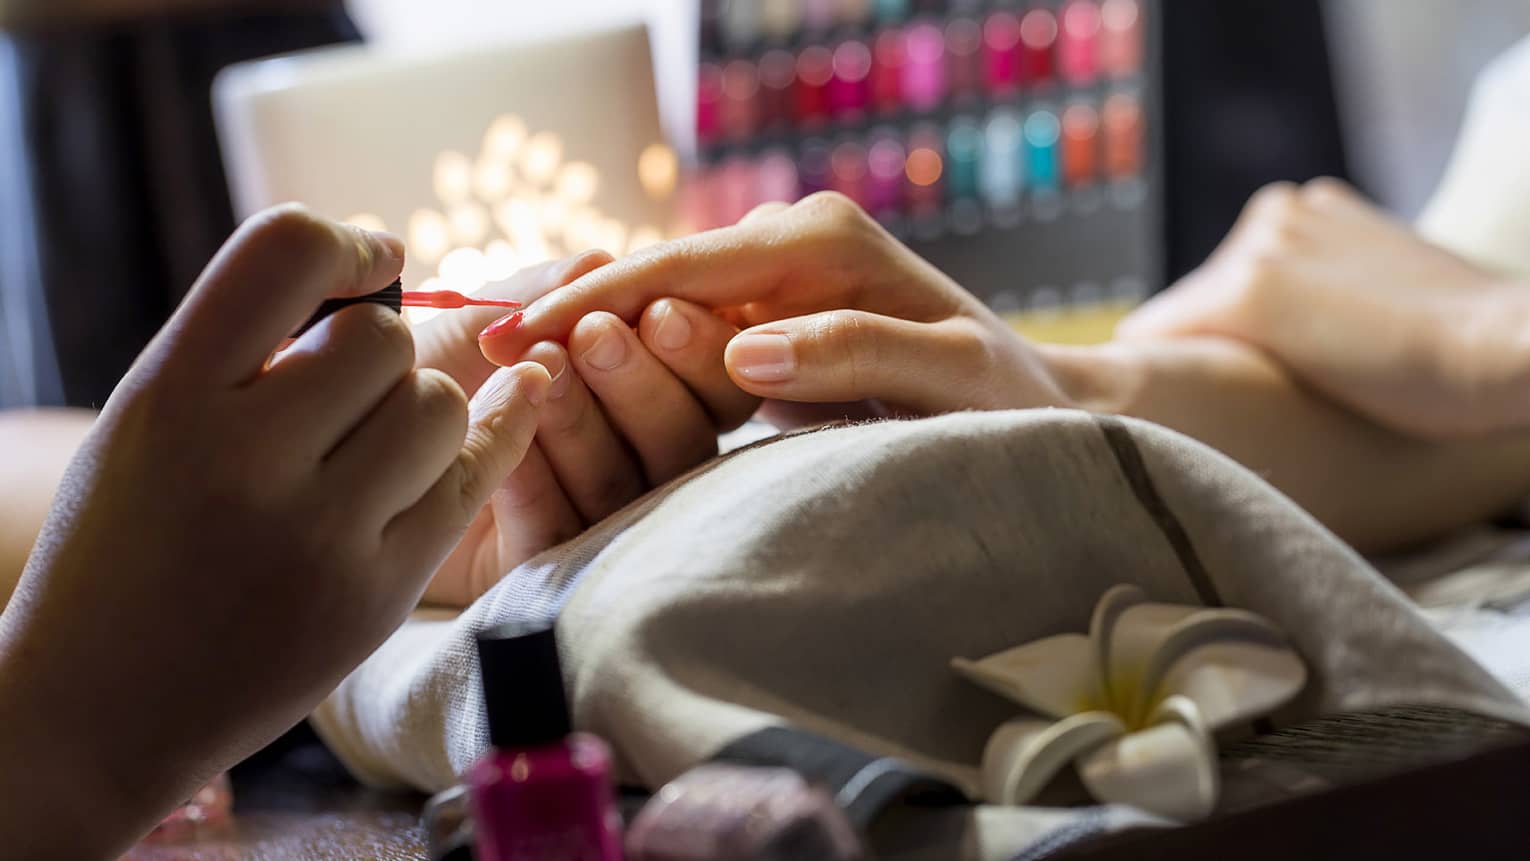 Close-up of manicure, hands resting on pillow as nails painted